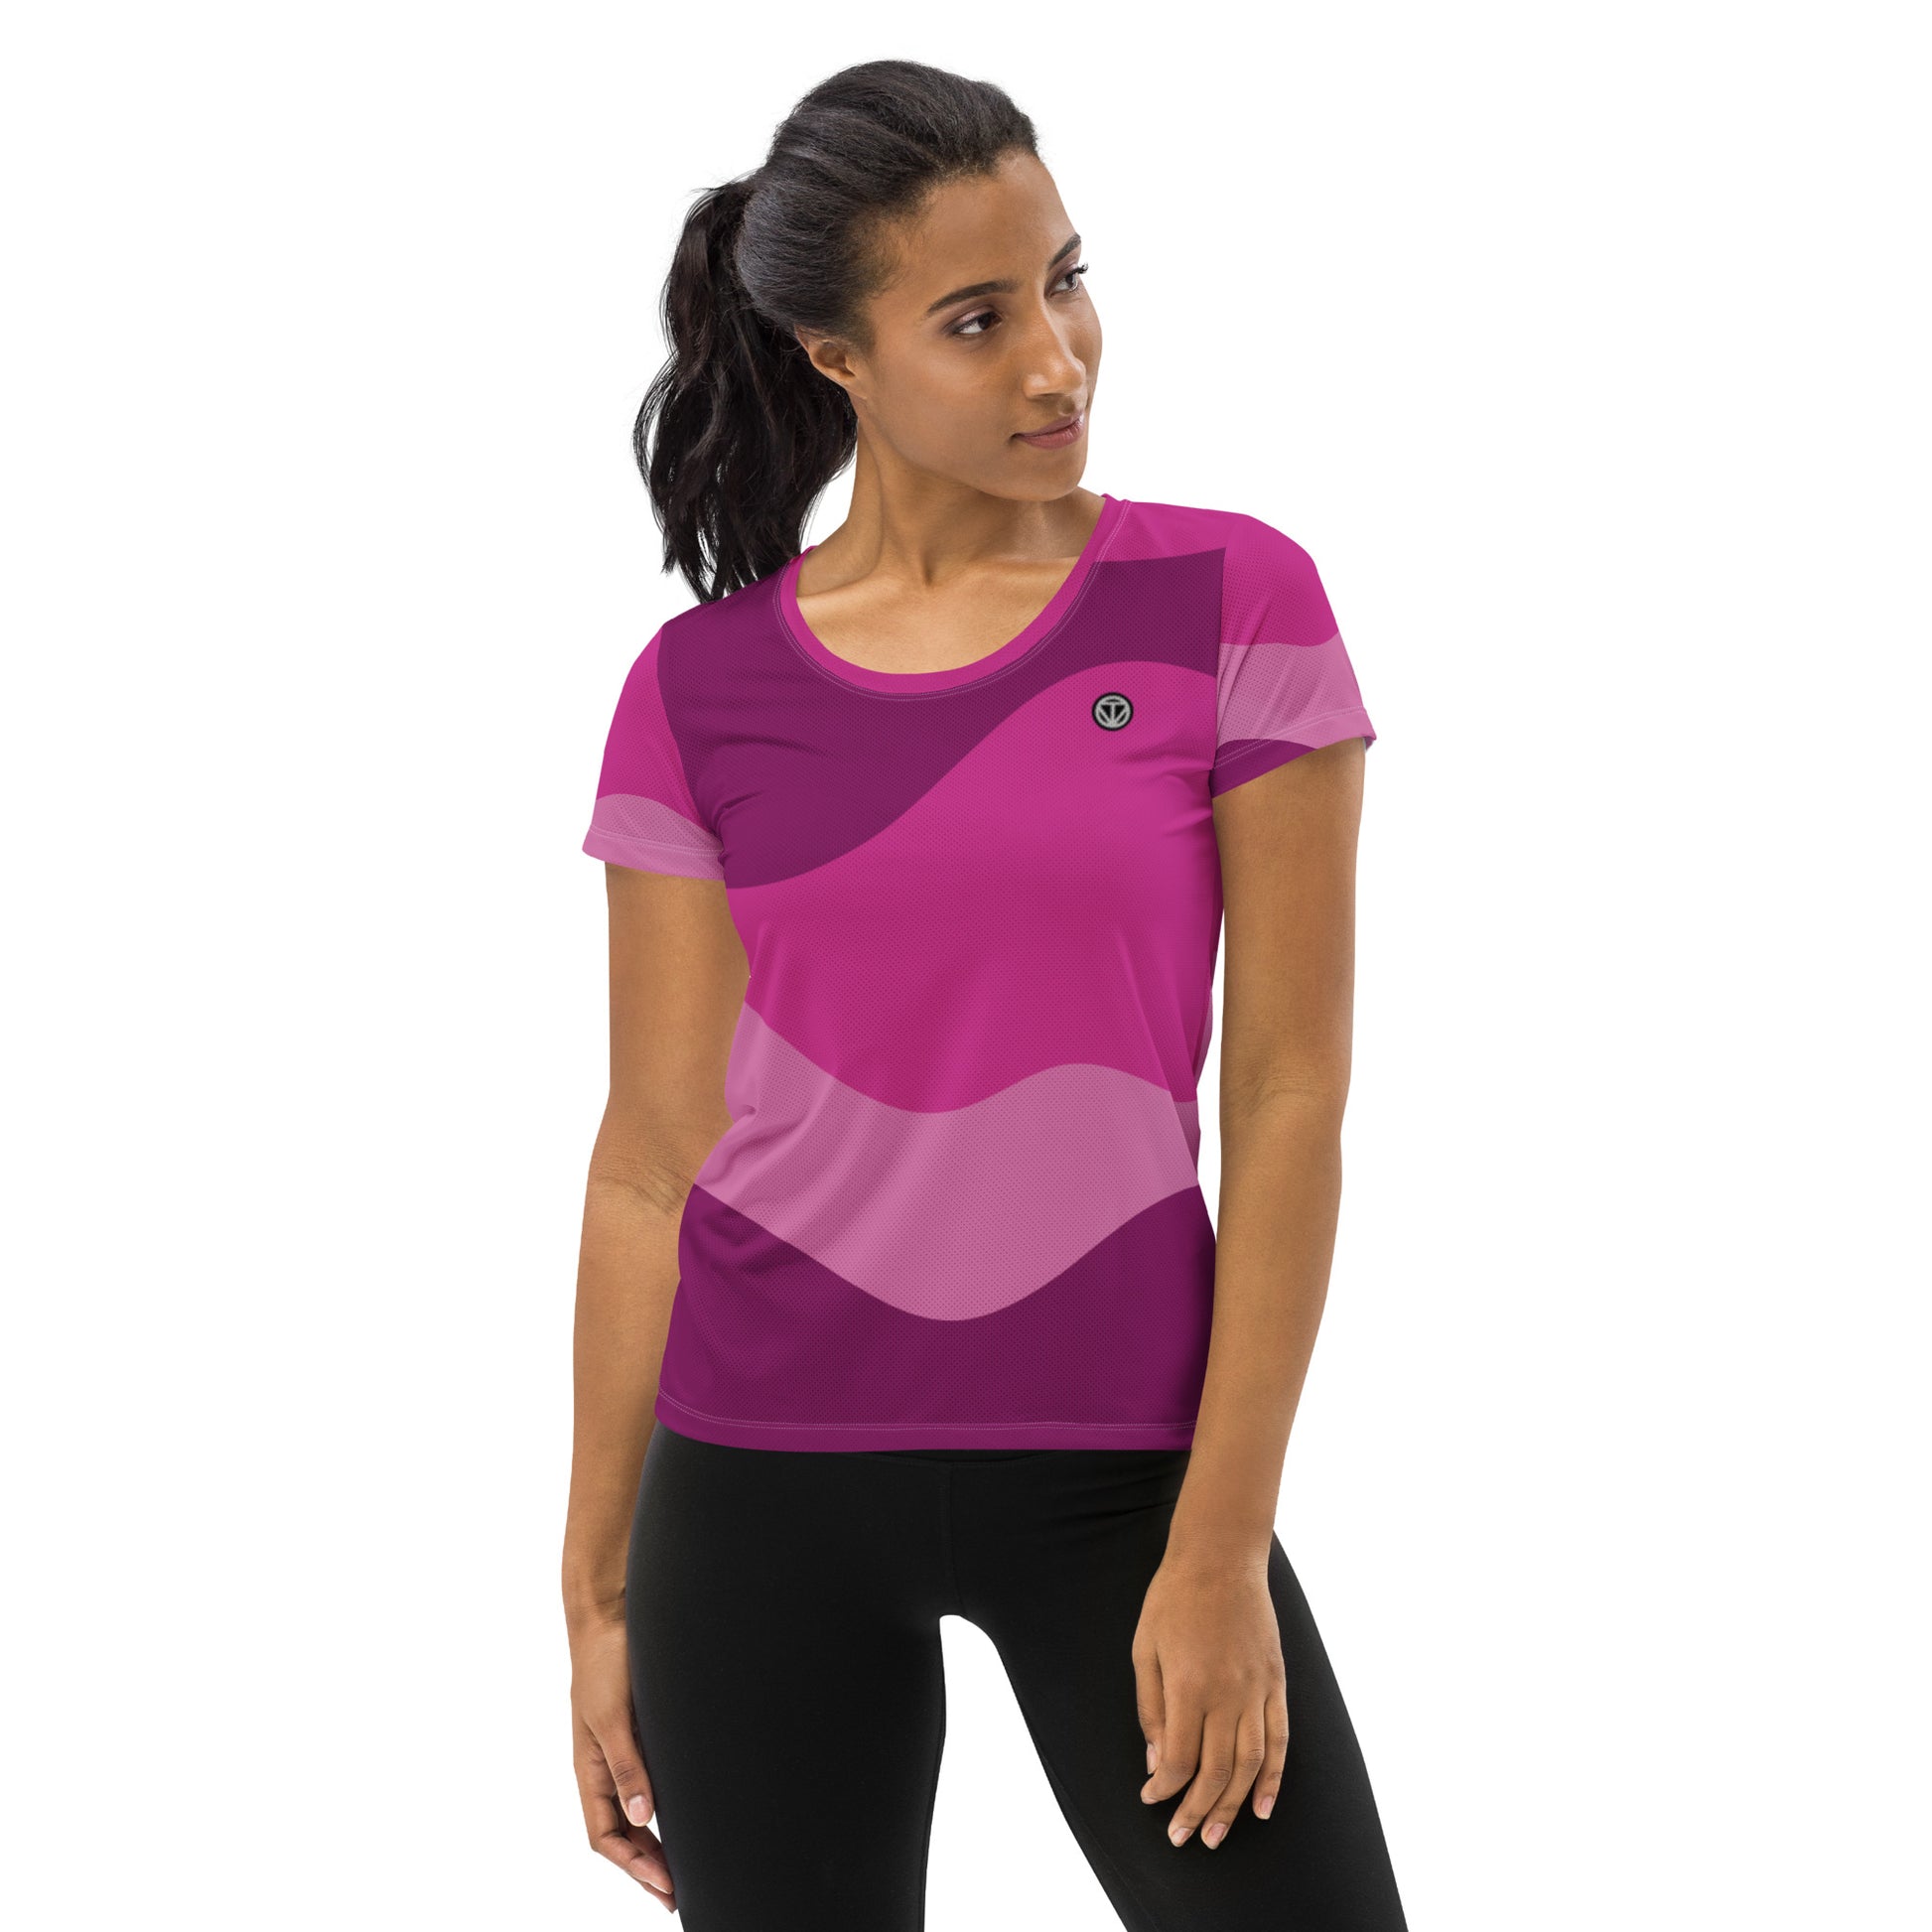 TIME OF VIBES - Women's Athletic T-shirt ABSTRACT (Pink) - €45.00